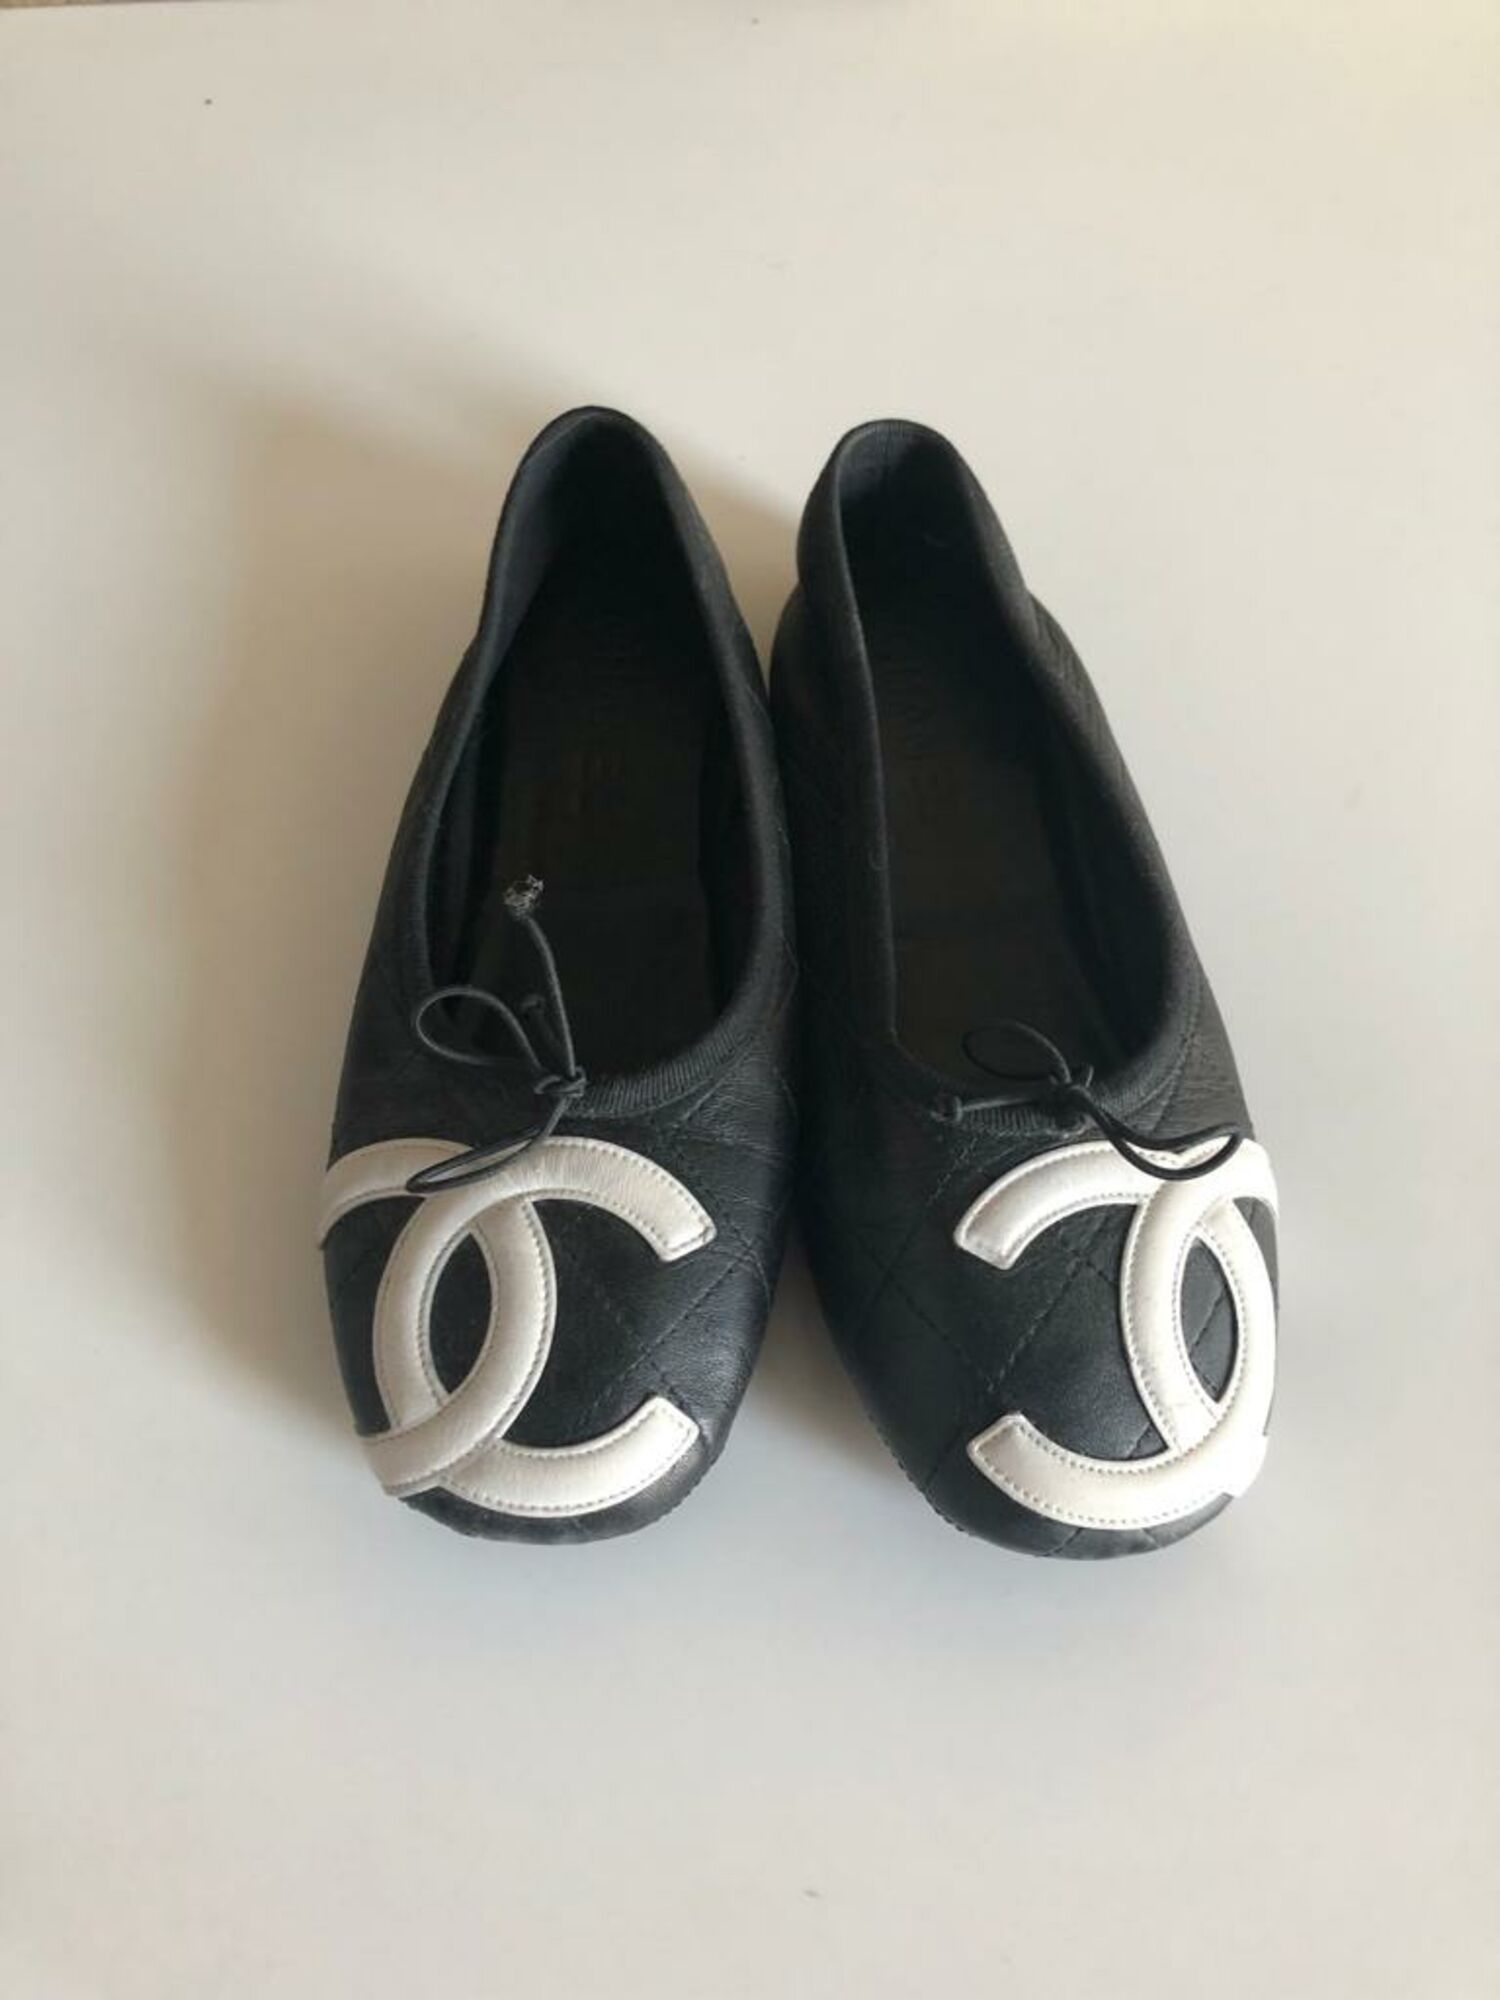 Leather Ballet flats Chanel - 37, buy pre-owned at 150 EUR